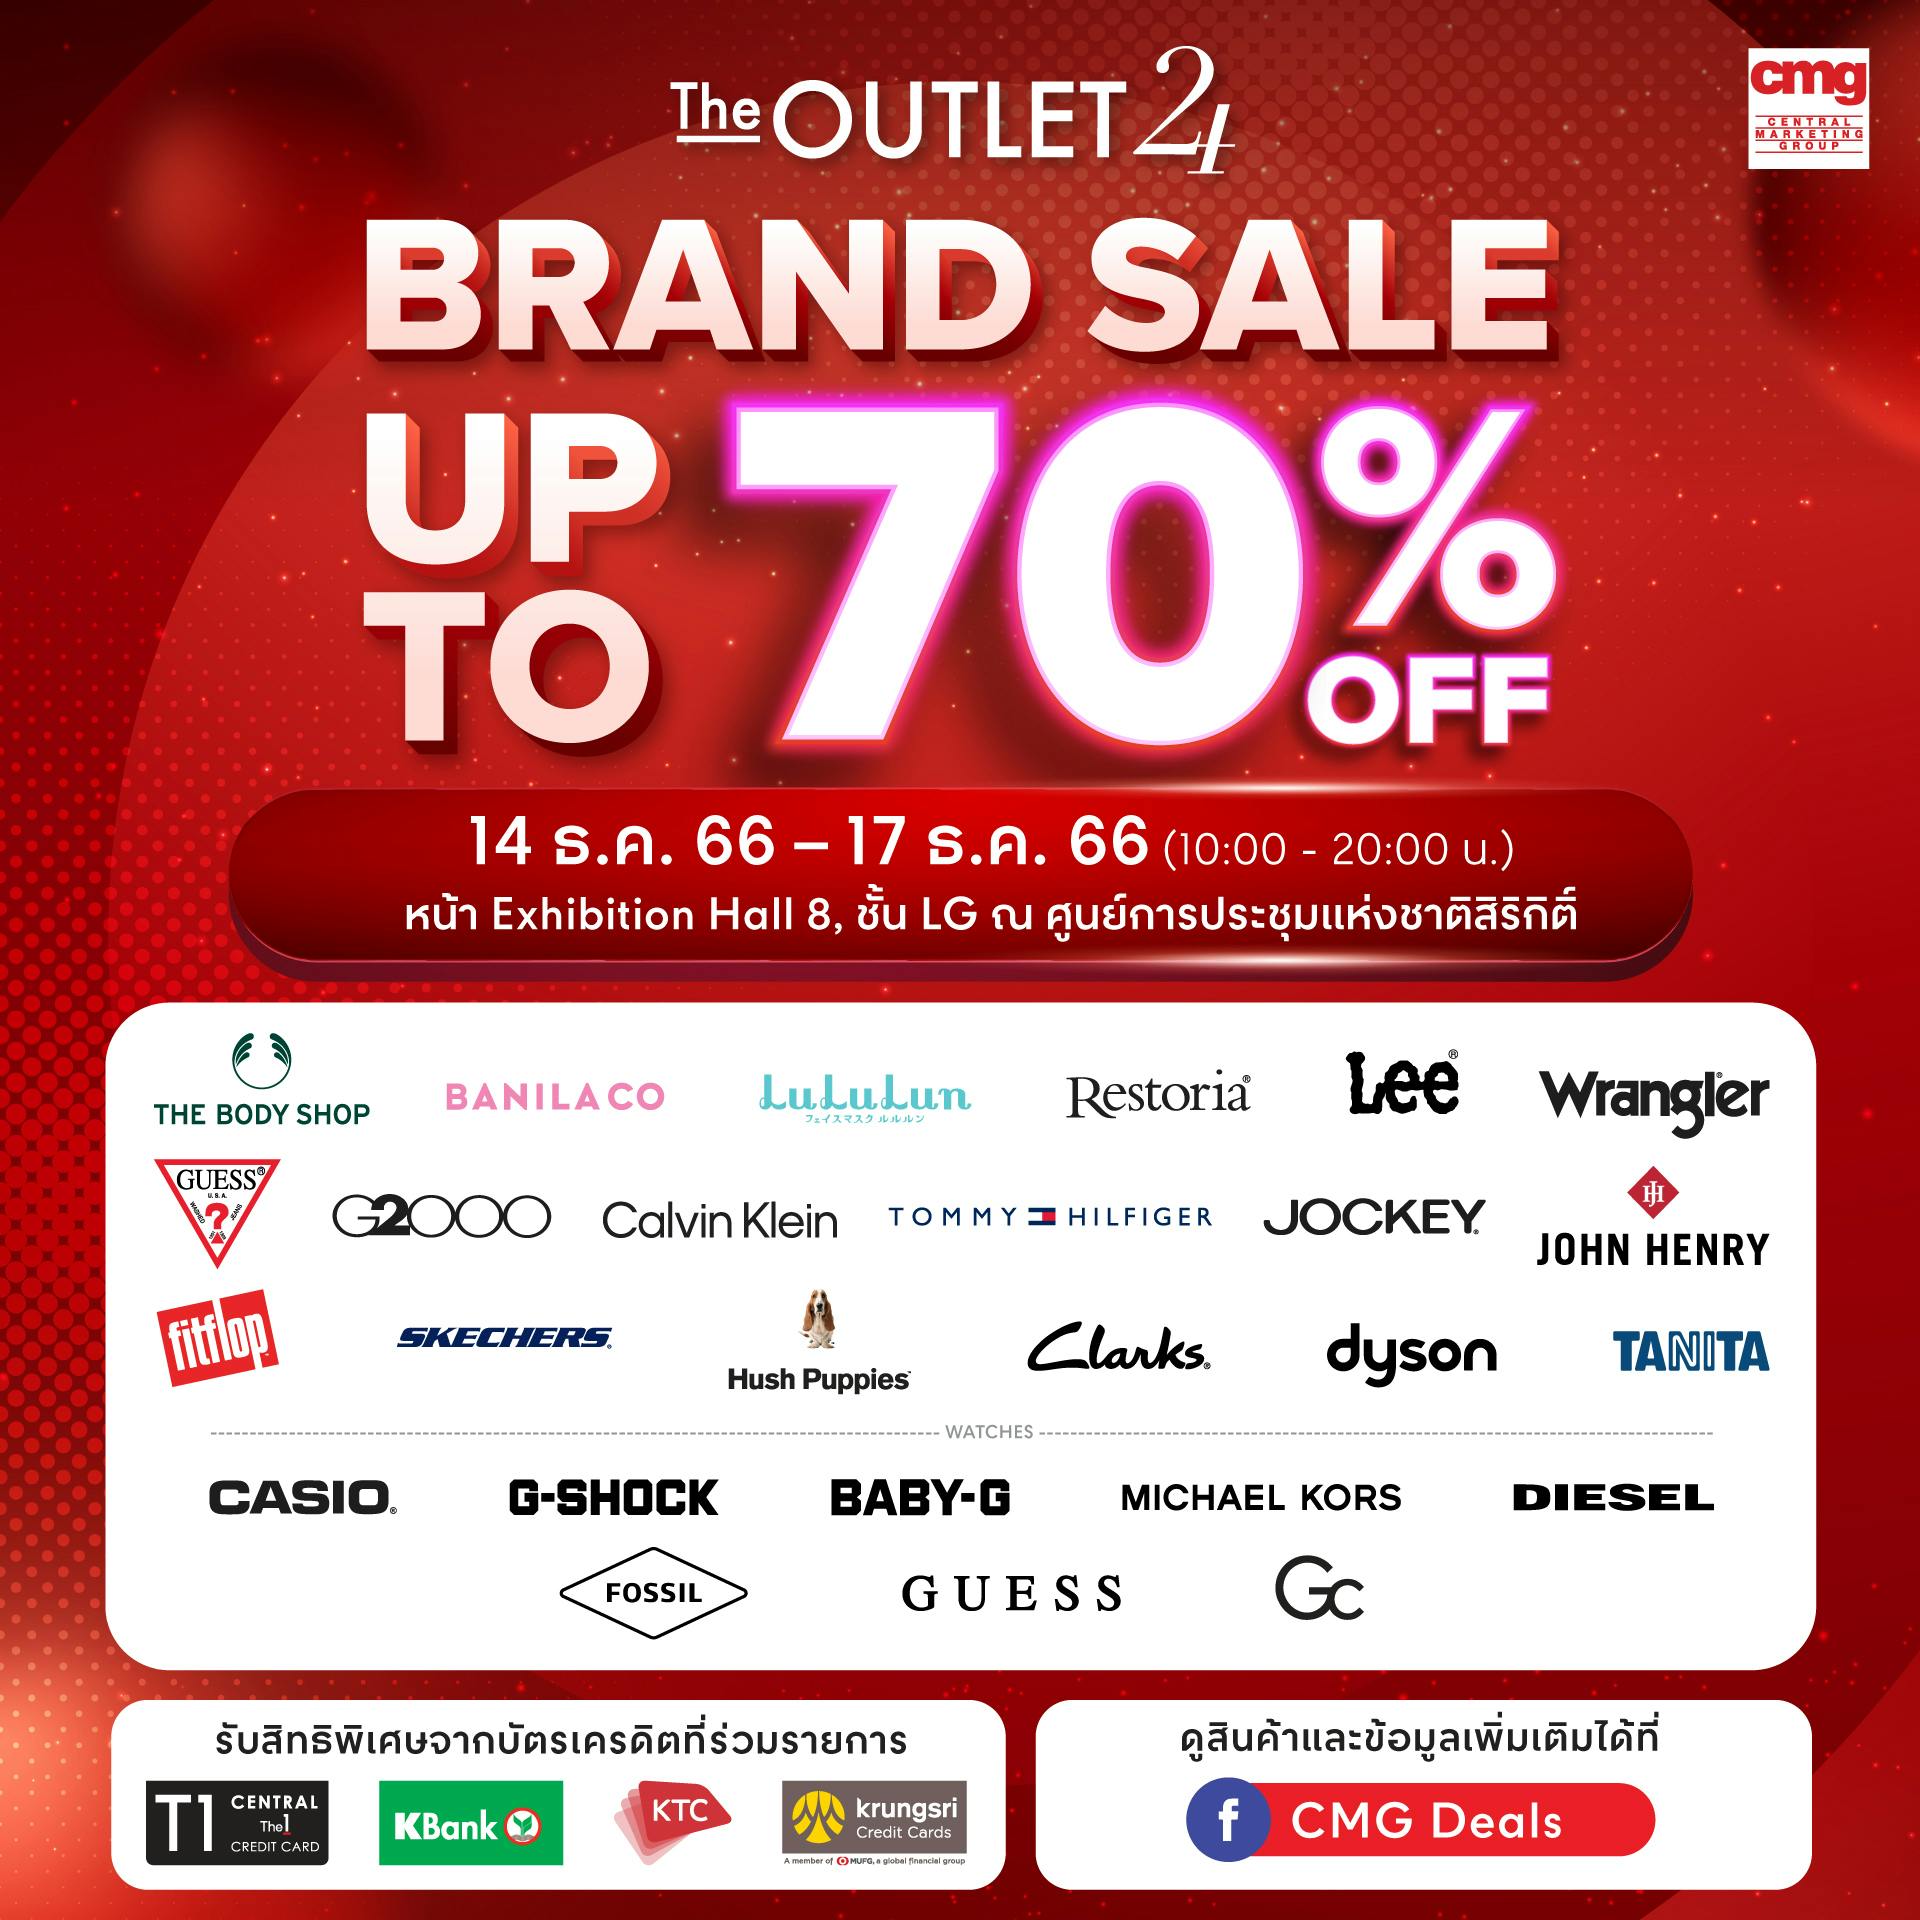 The Outlet24 Brand Sale